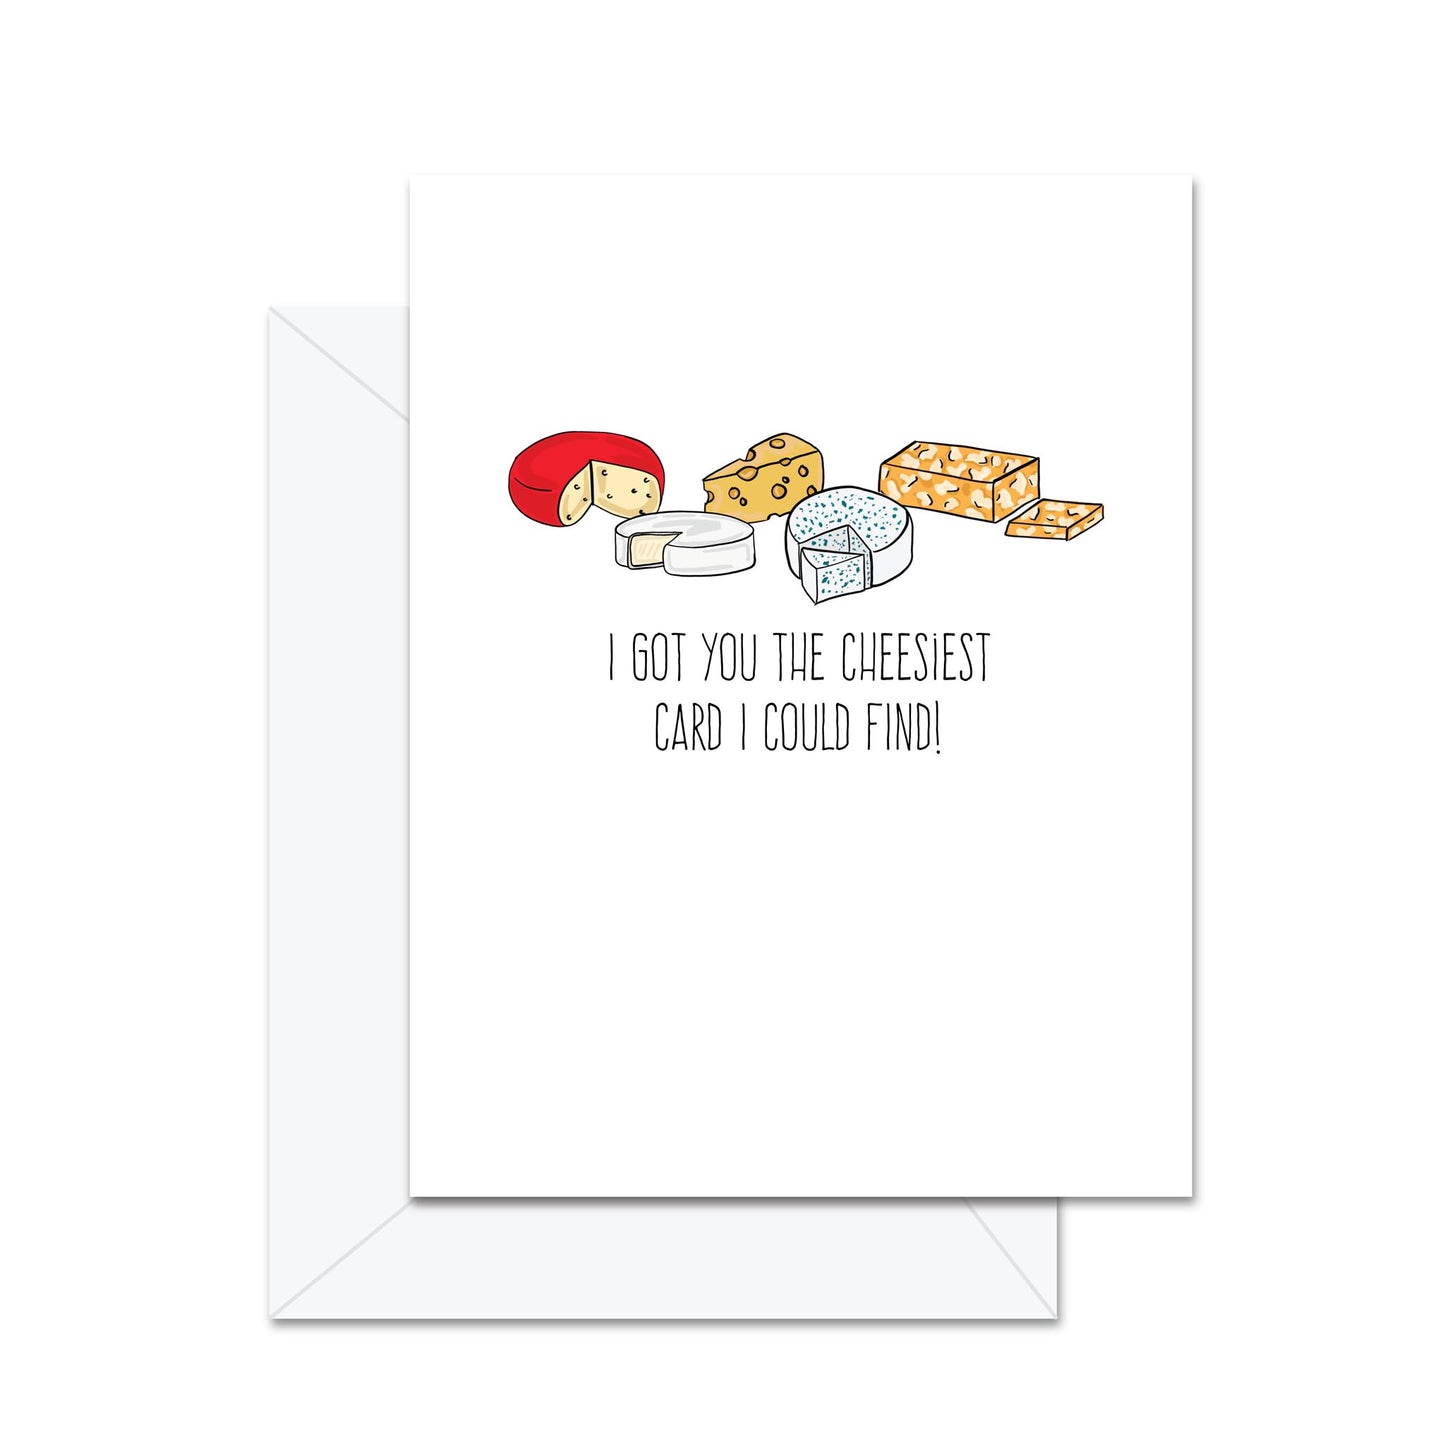 I Got You The Cheeziest Card I Could Find! - Greeting Card